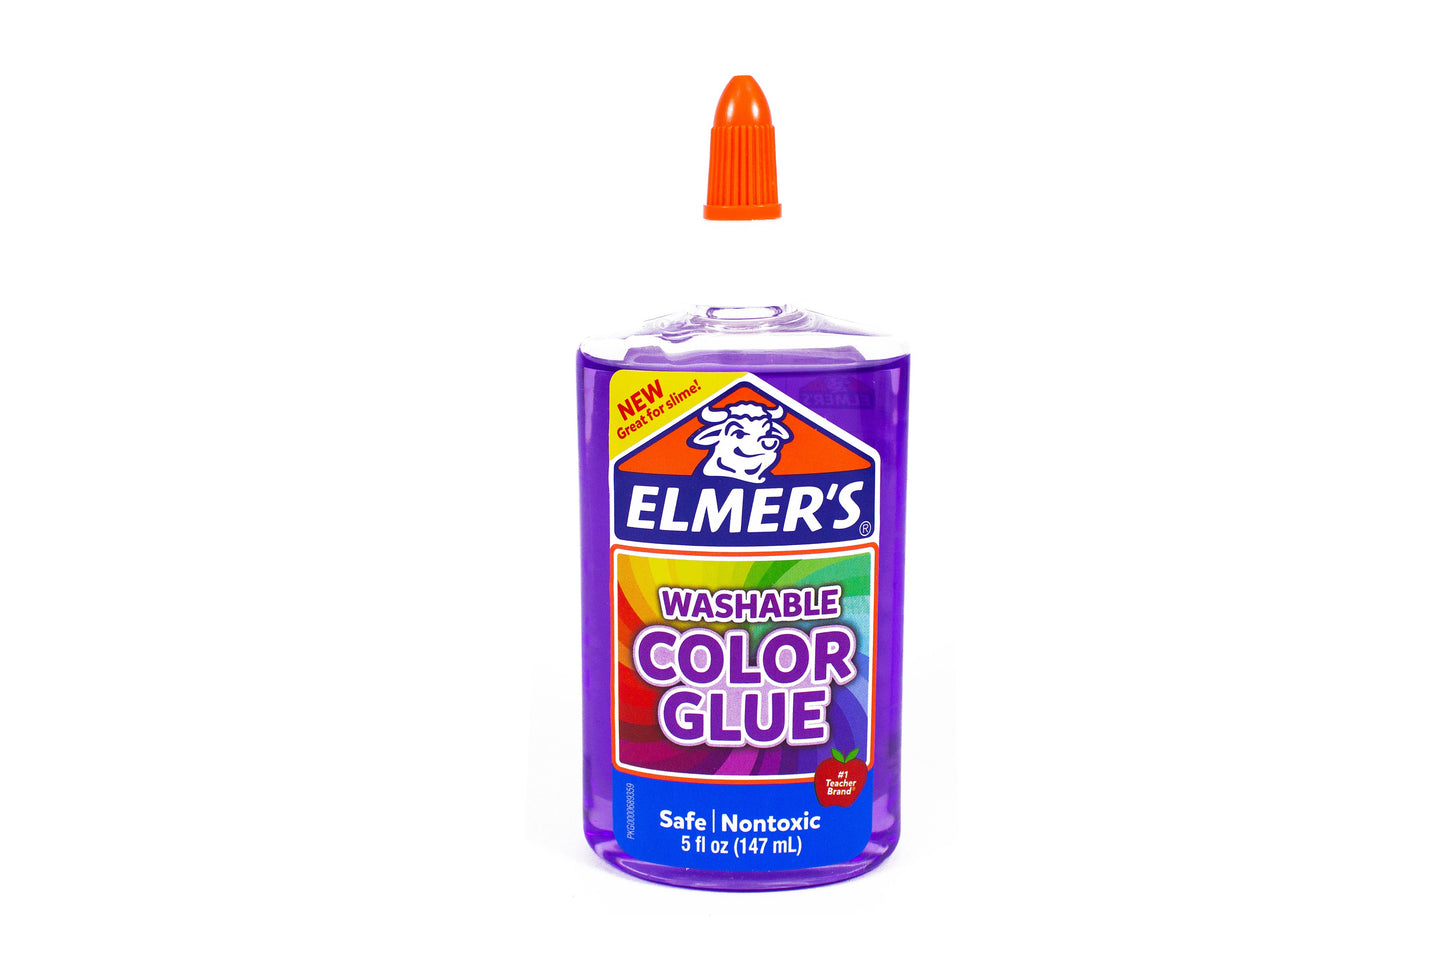 Elmer's Washable Color Glue 5oz | Sold by 3s